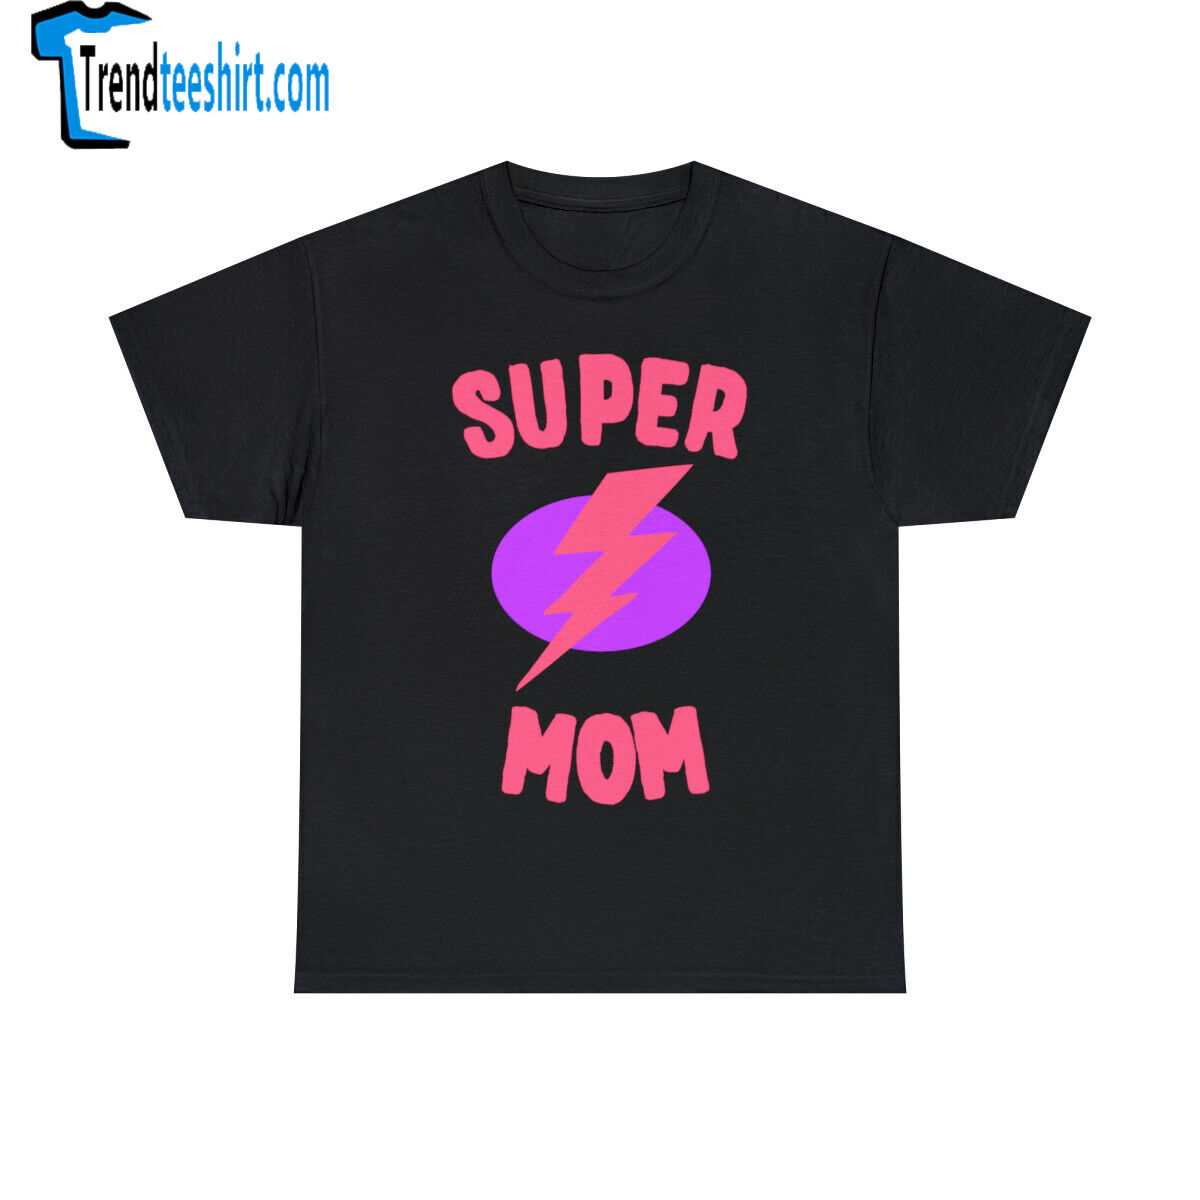 Super Mom Mother's Day Graphic Tee Shirt